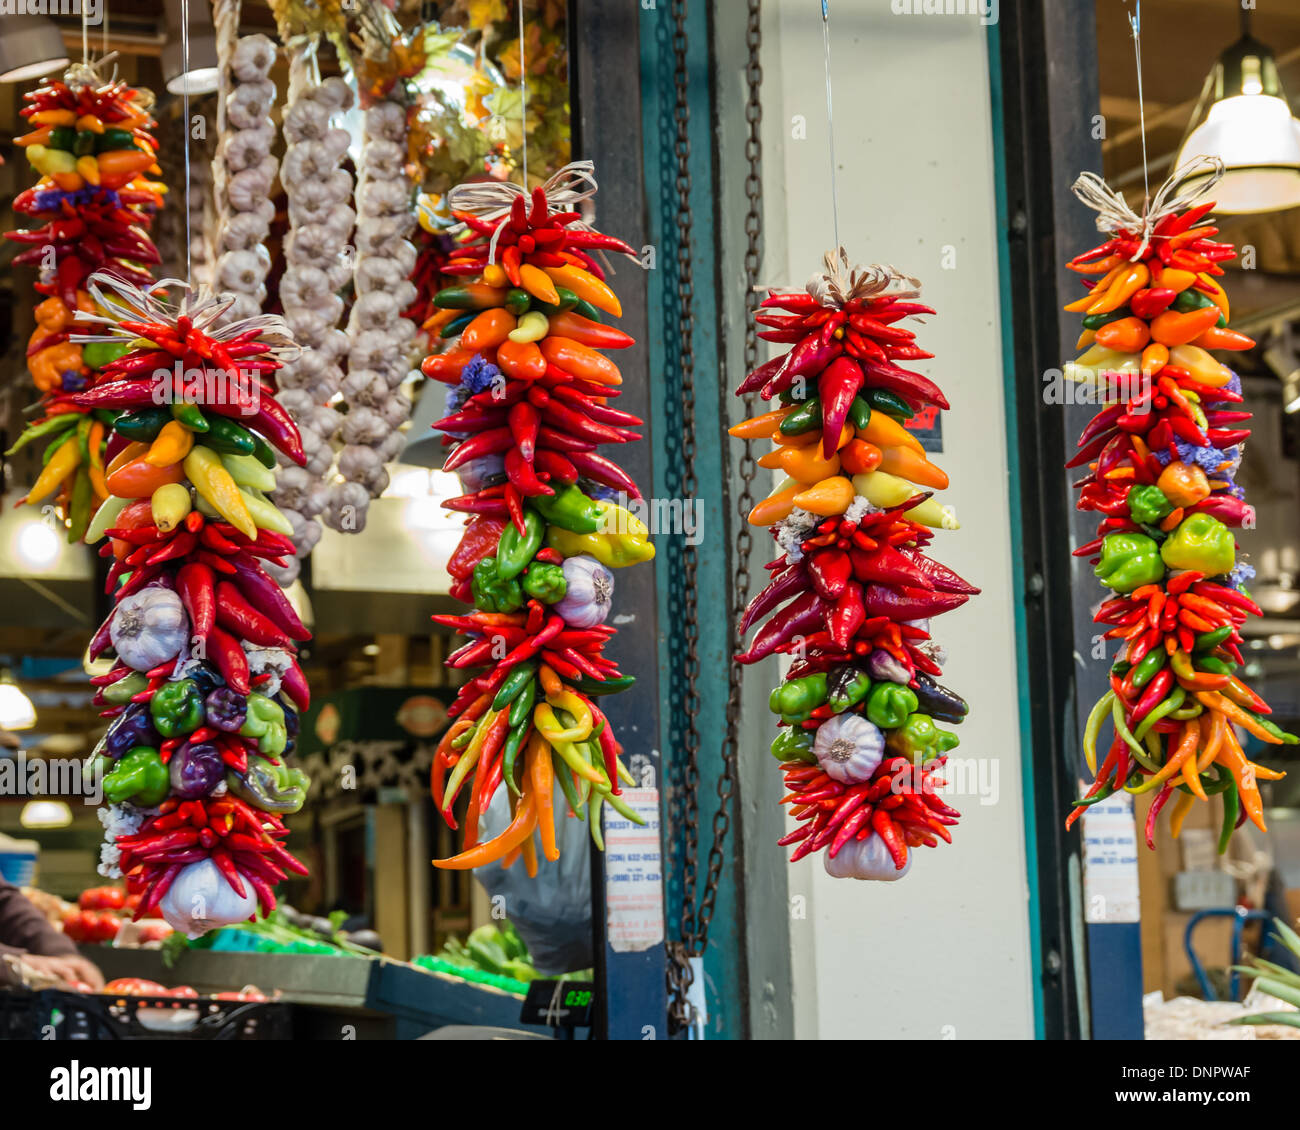 Display of peppers and garlic hanging to dry in a market stall Pike Place Market Seattle, Washington, USA Stock Photo